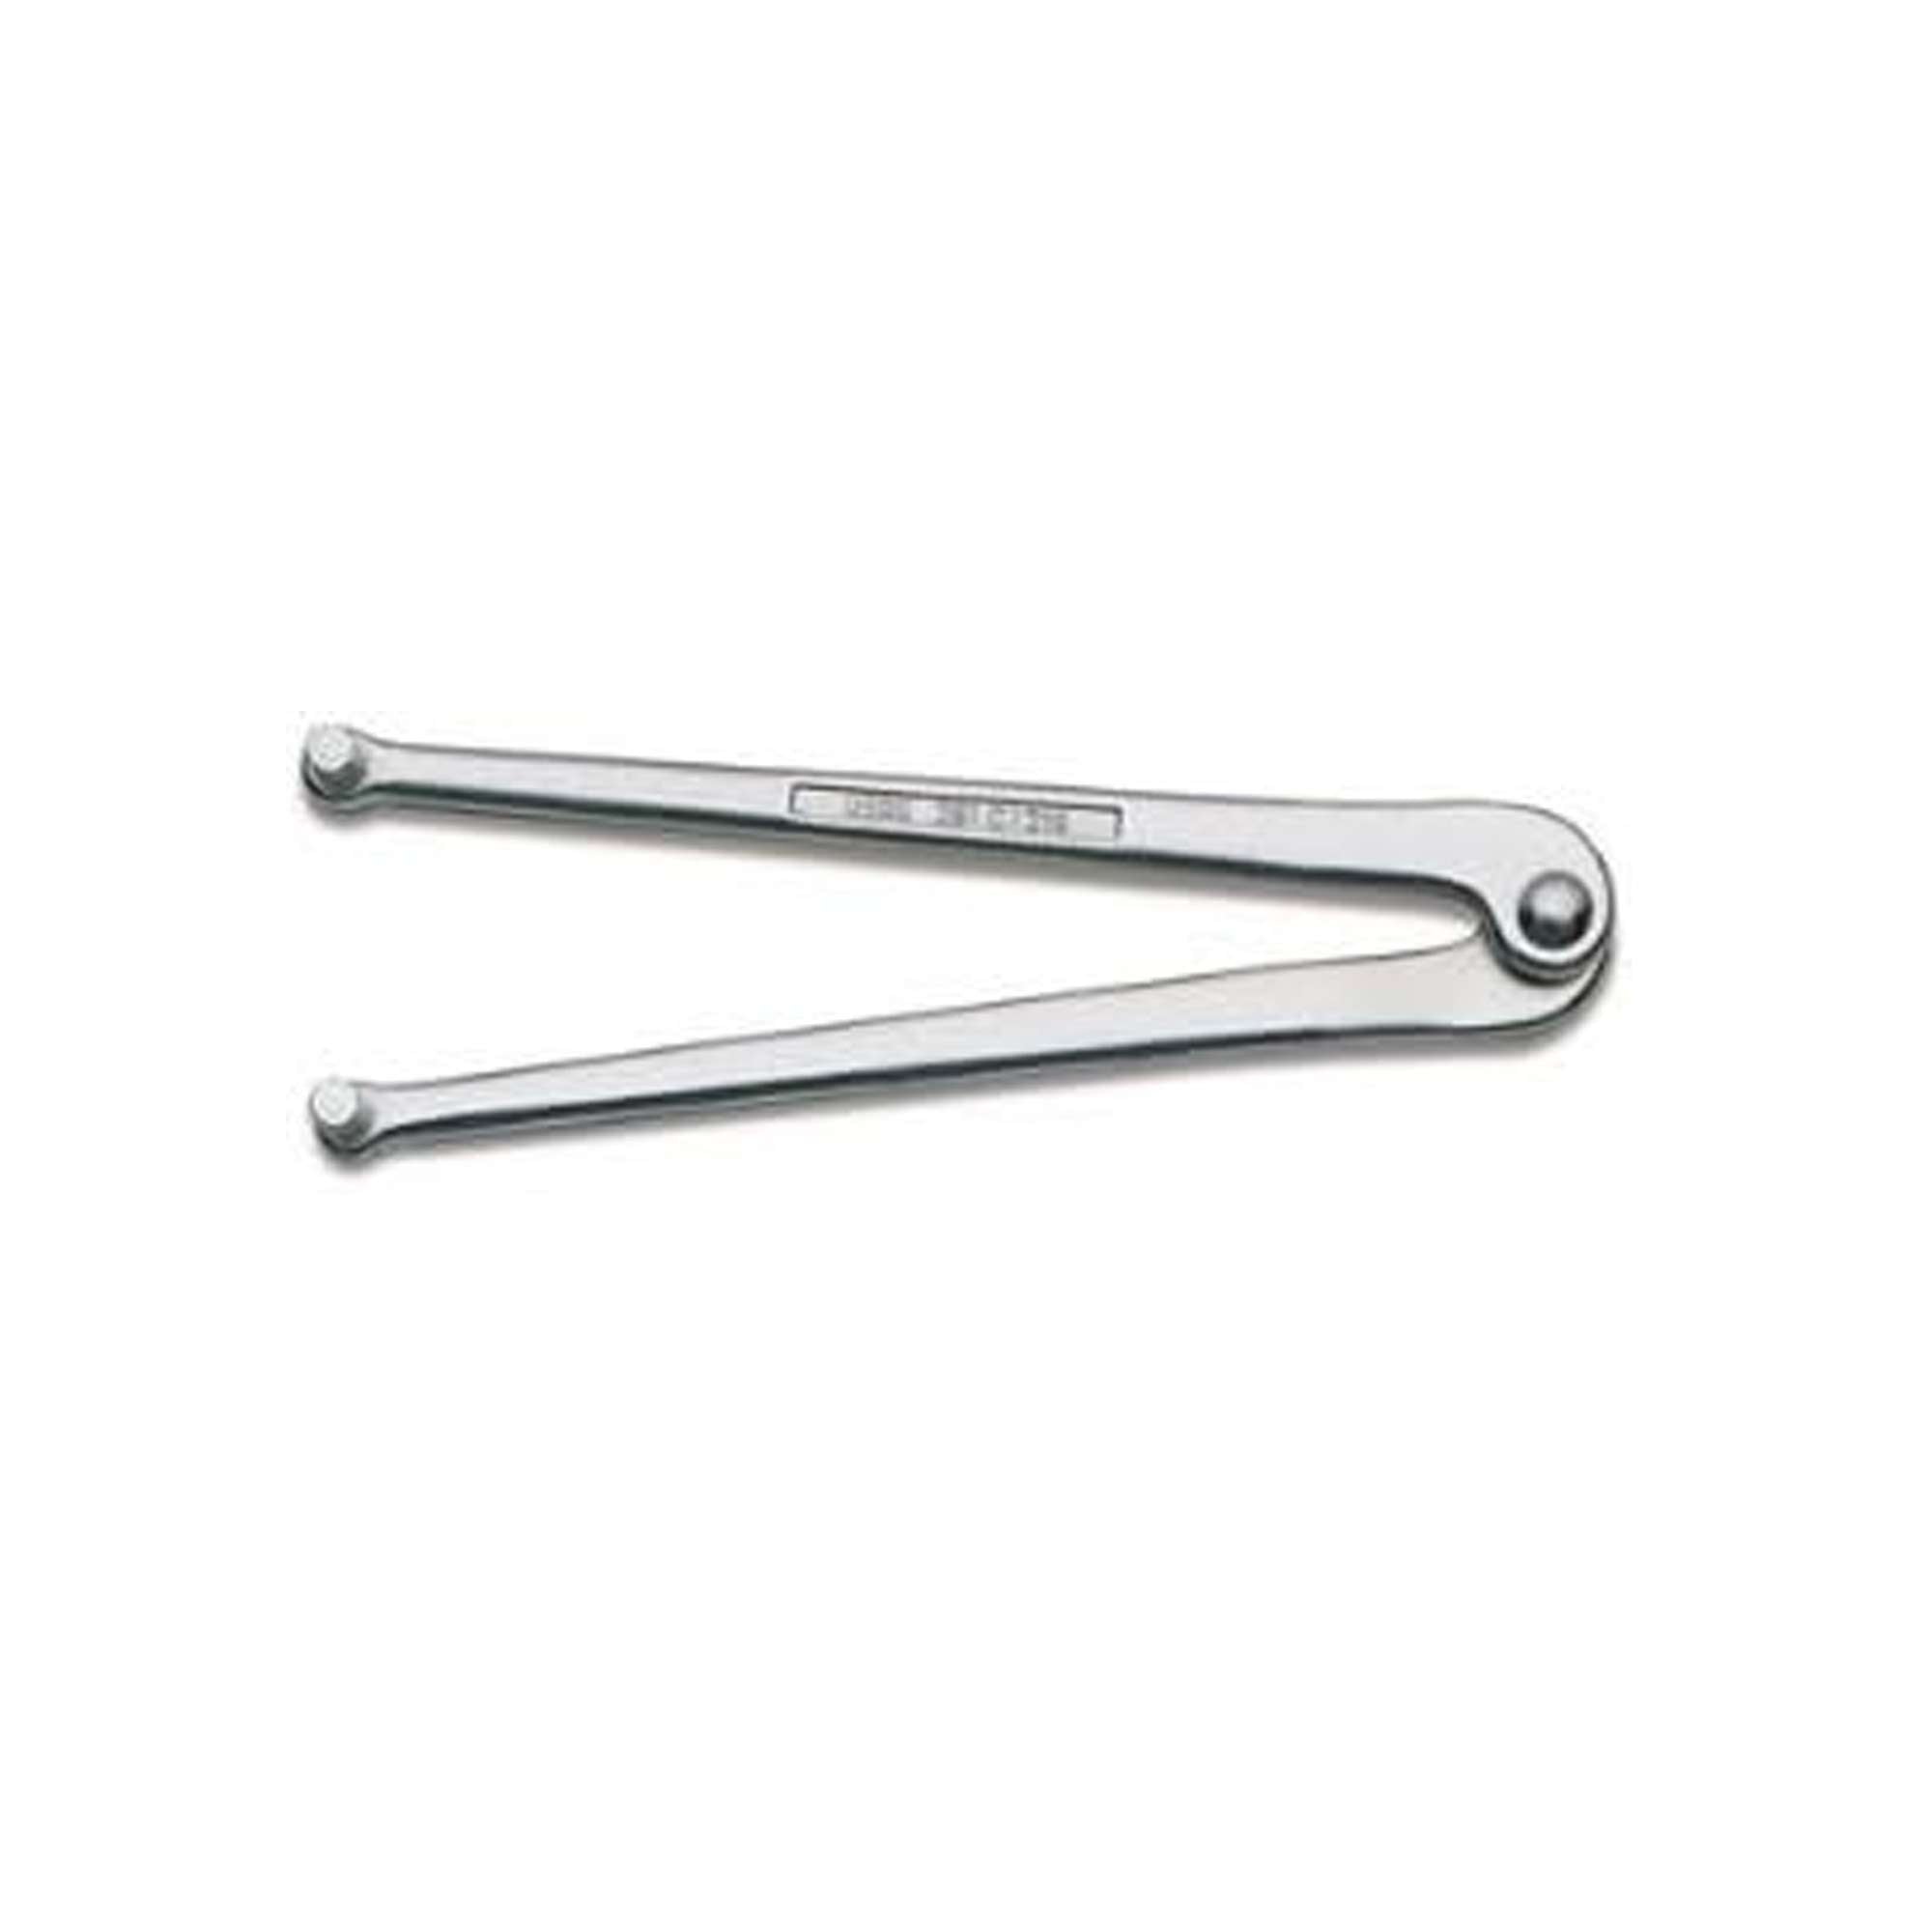 Adjustable pin-type face wrenches with round pins (3-4-5-6) - Usag 281 C